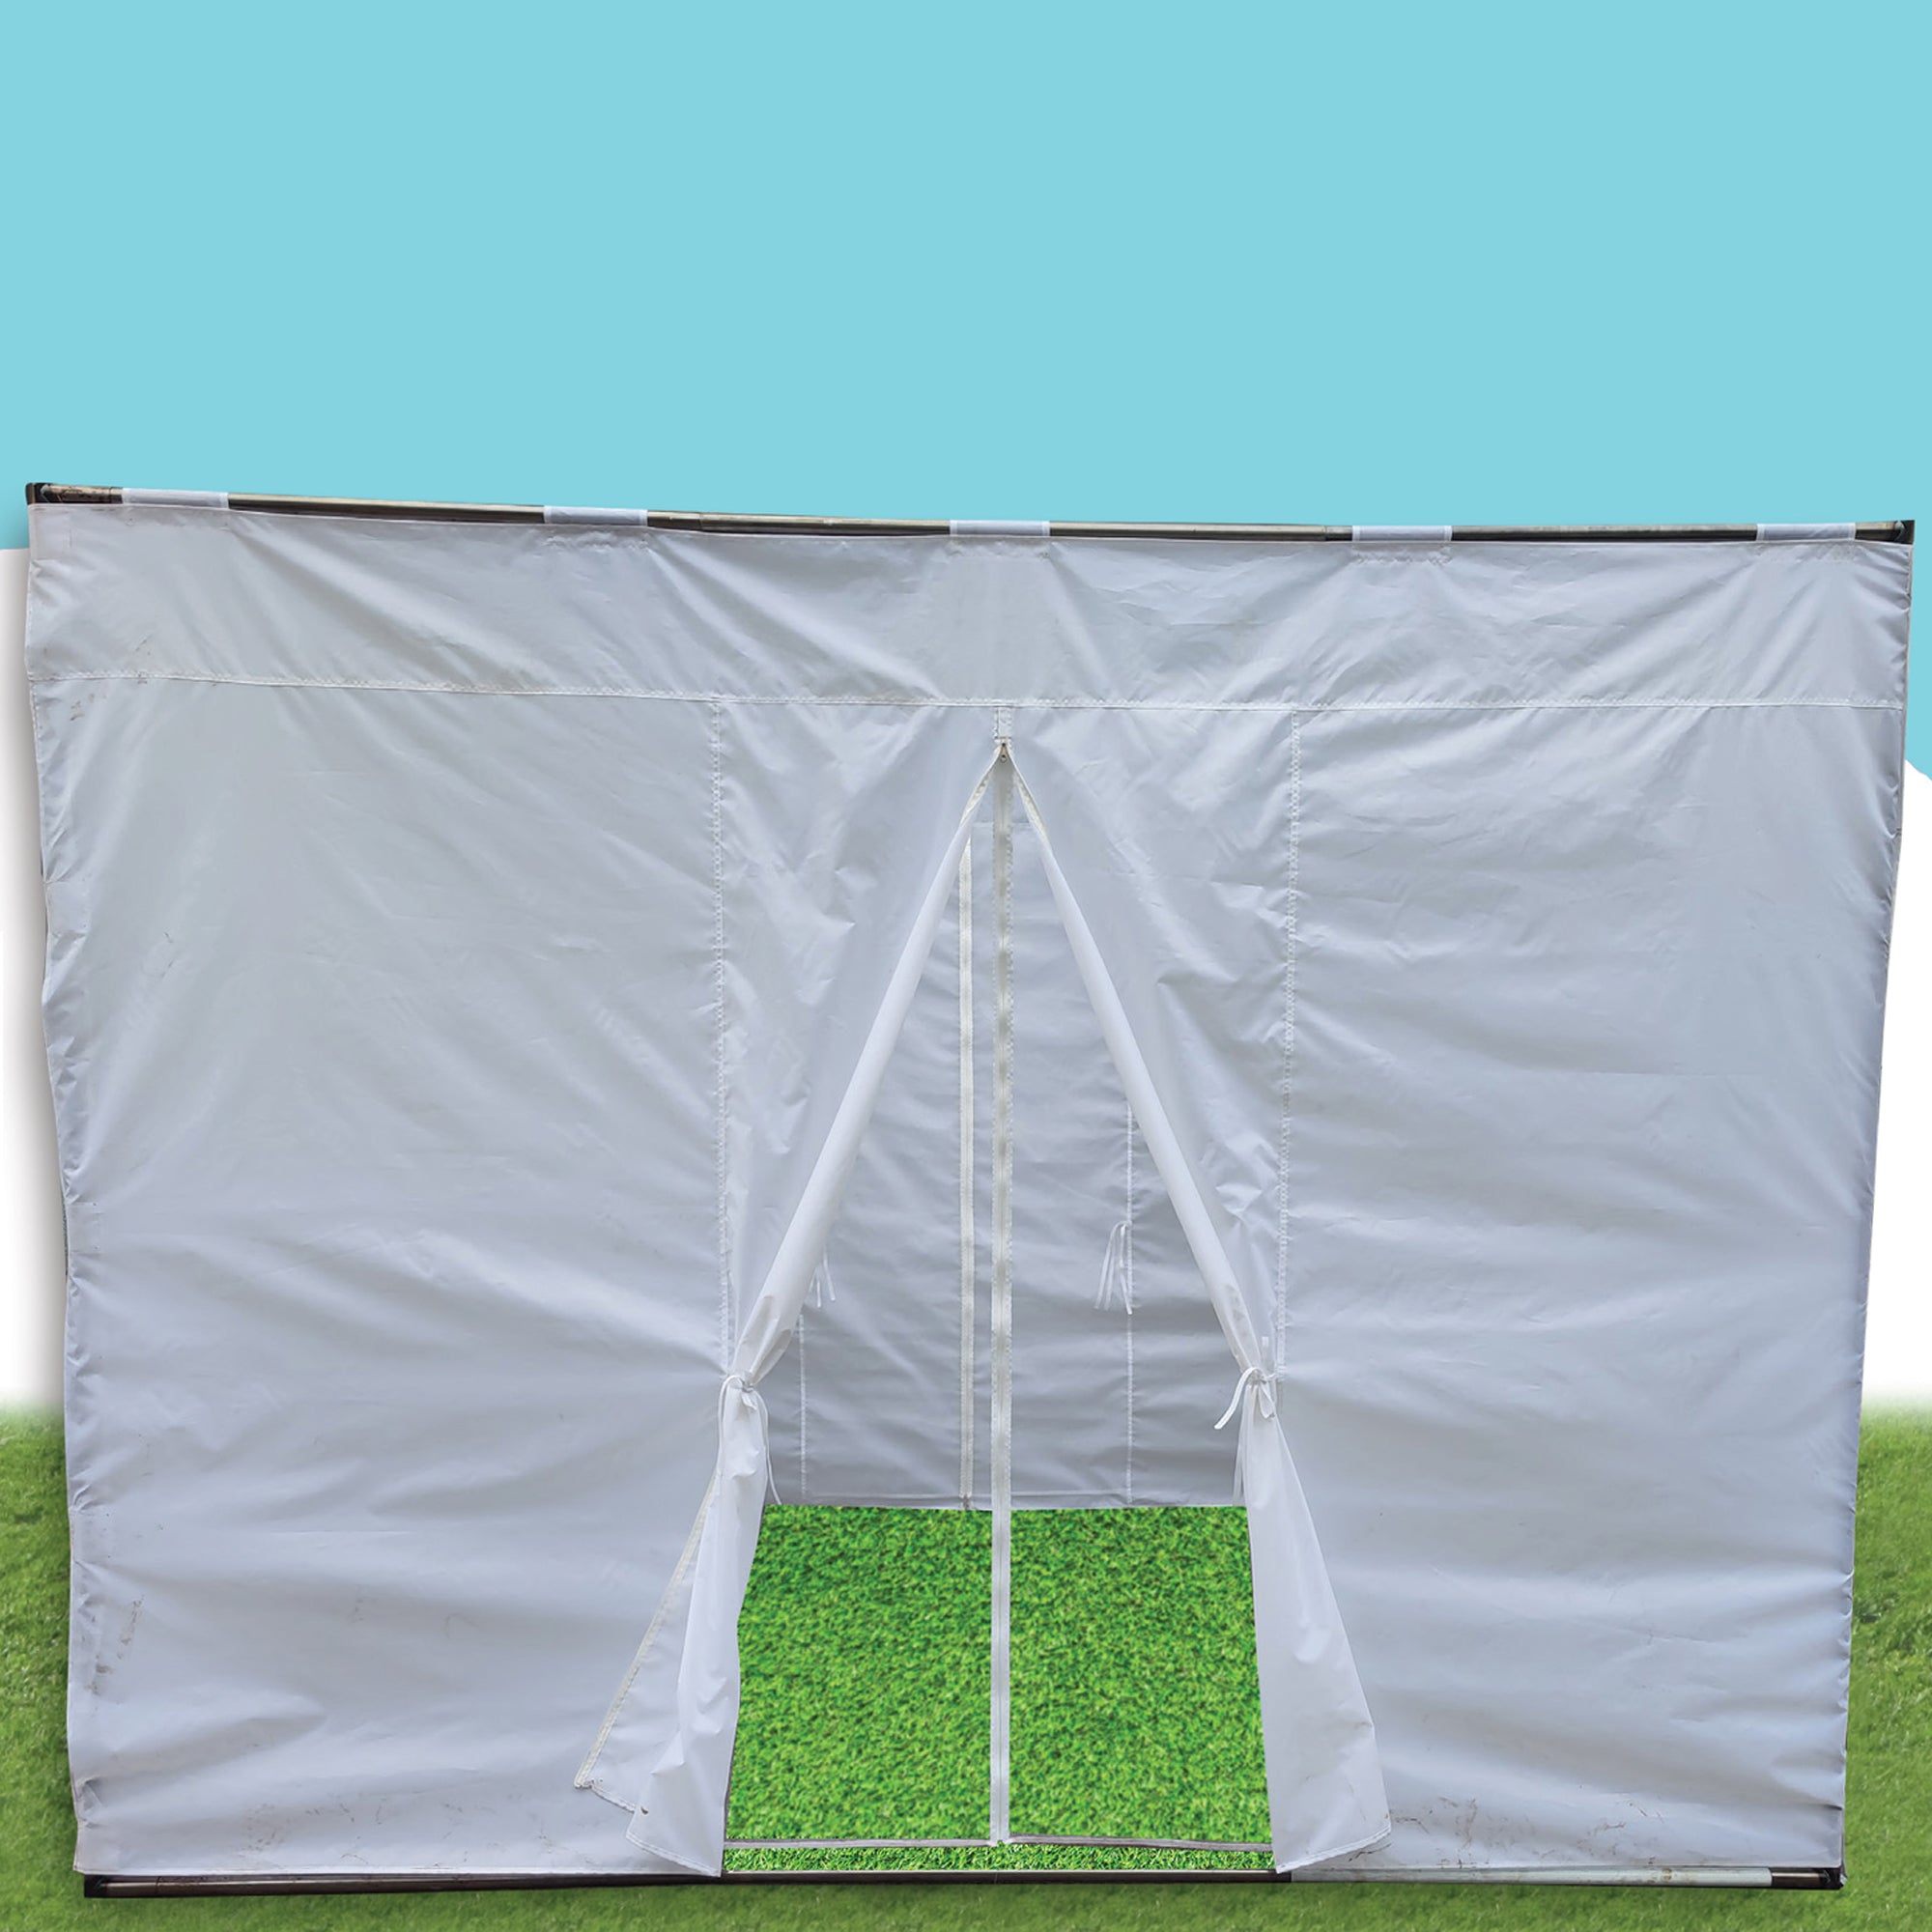 Sukkot Hadar -High Quality Canvas Sidewall for Sukkah, 36 feet ,4 parts. (only Canvas )